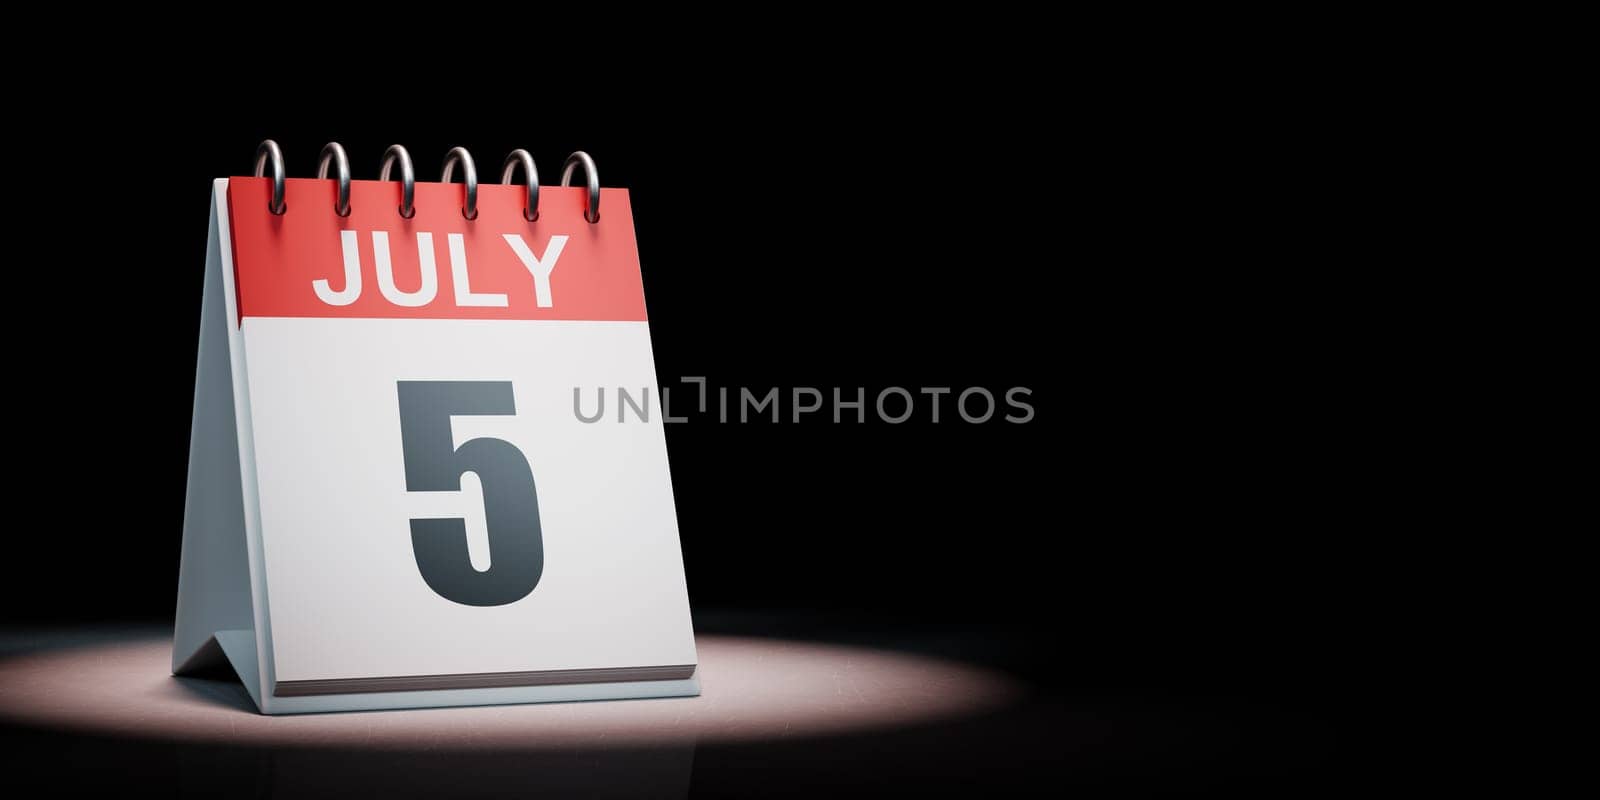 Red and White July 5 Desk Calendar Spotlighted on Black Background with Copy Space 3D Illustration